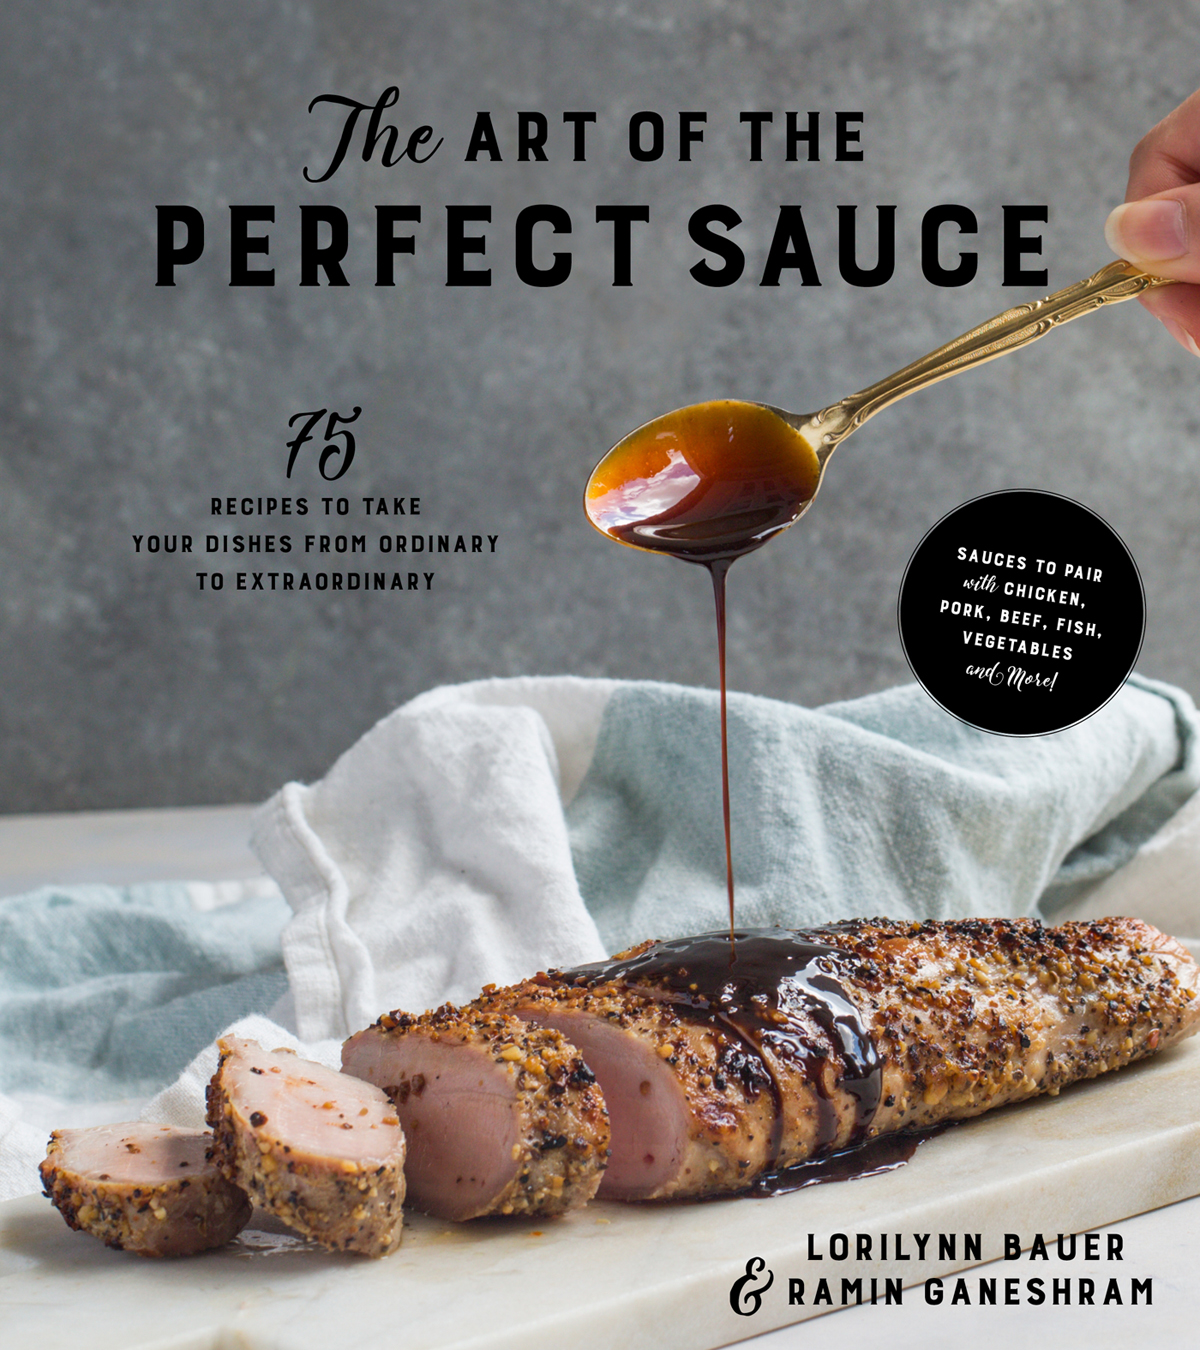 The ART OF THE PERFECT SAUCE - photo 1